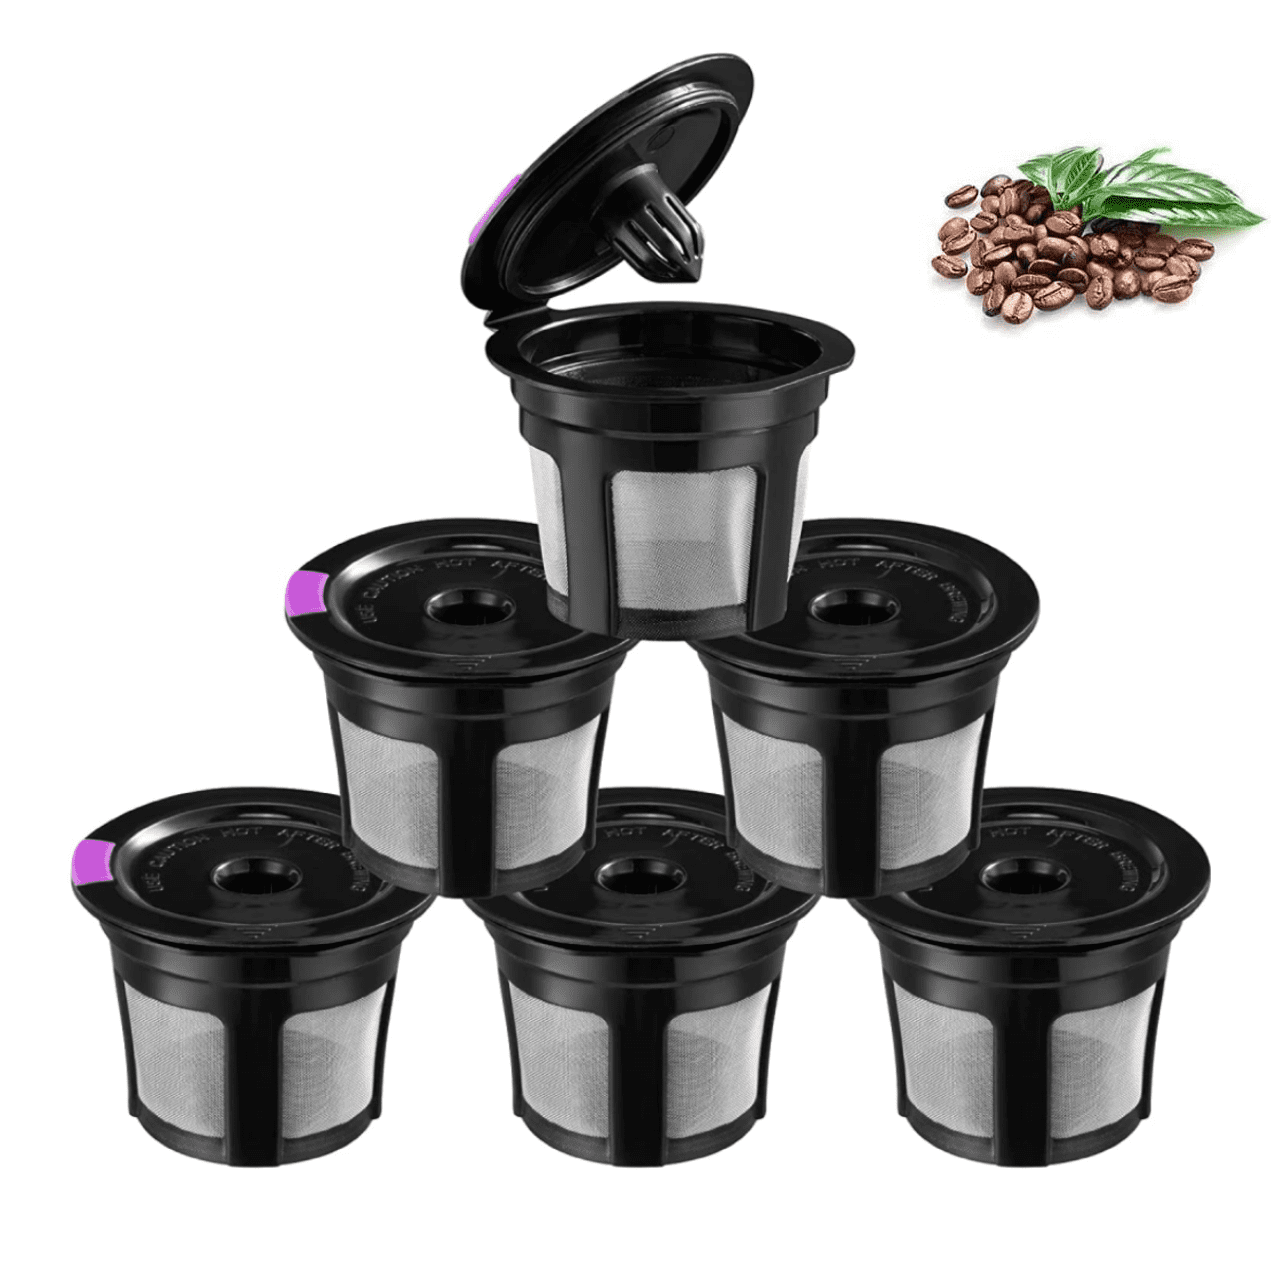  MaxRona Reusable K Cups for Keurig 2.0&1.0, 8 Packs Universal  Refillable K Cups Coffee Filter, BPA-FREE K Cup Reusable Fits Most Keurig K- Cup Brewers: Home & Kitchen